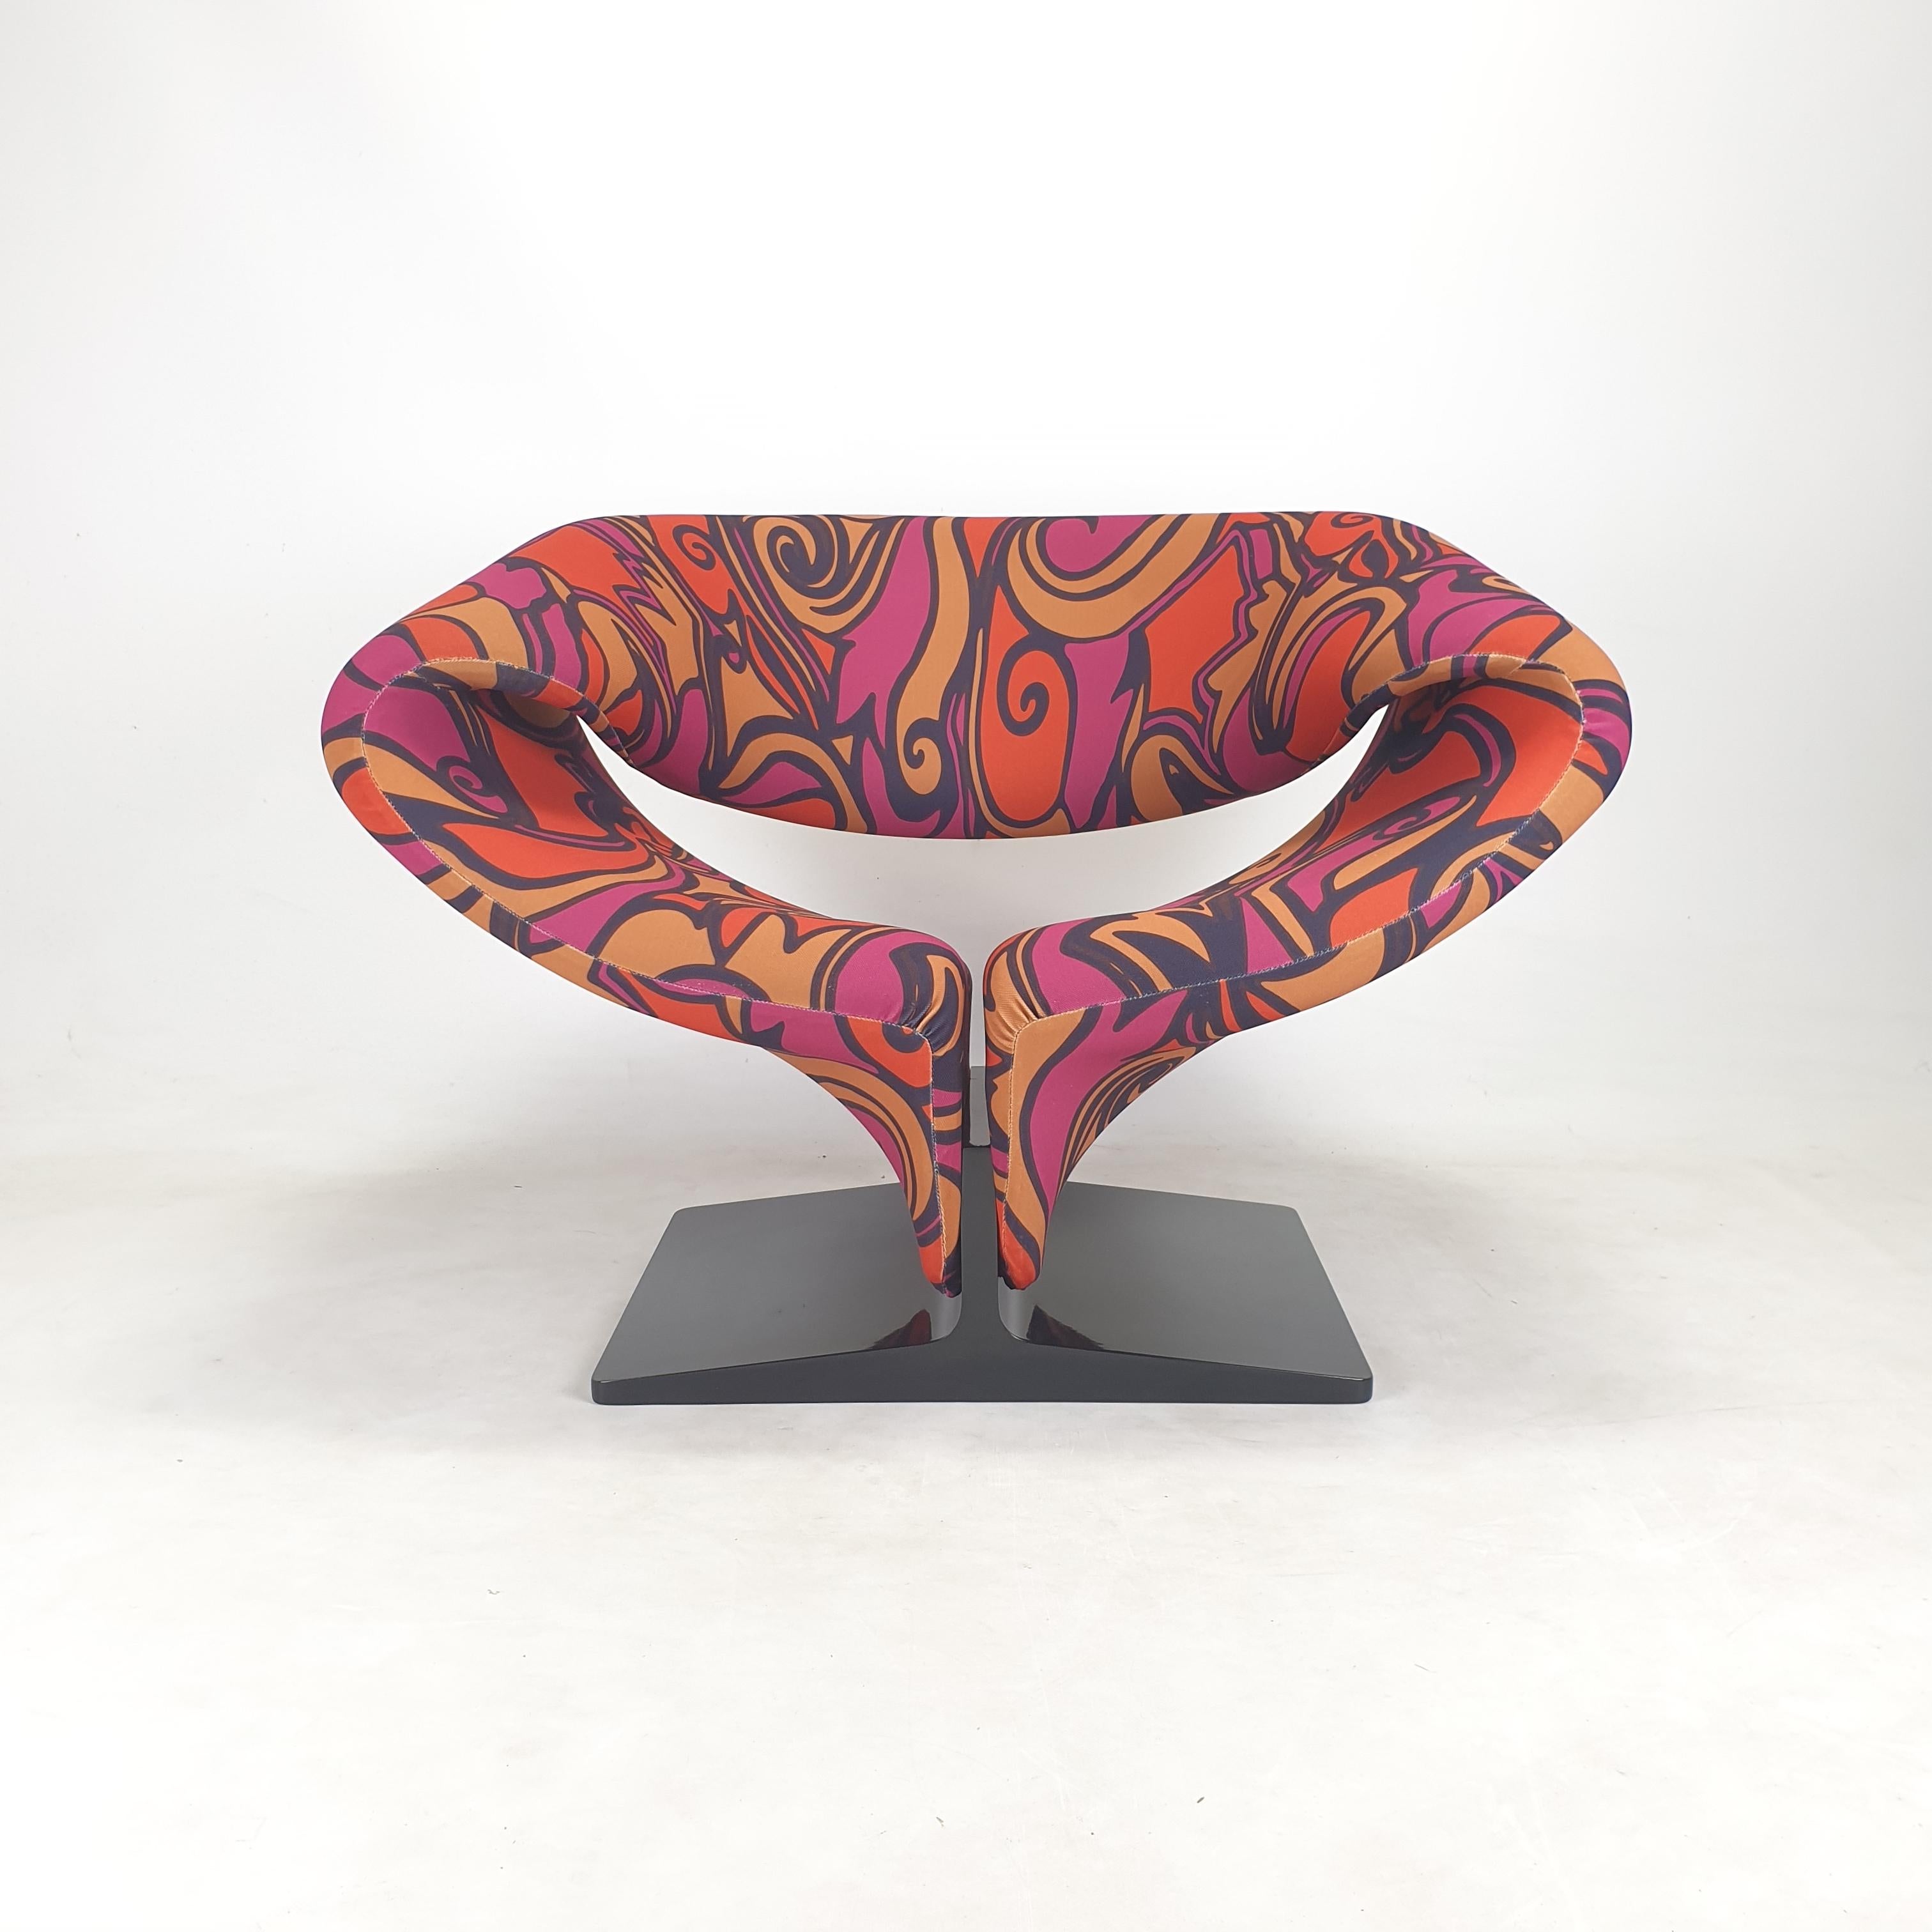 Amazing Ribbon Chair in a very rare edition.
It is designed by the famous Pierre Paulin (France) in the 60's and produced by Artifort (The Netherlands). 
This Iconic piece is produced in the 2000's.

The chair has the original and stunning Jack